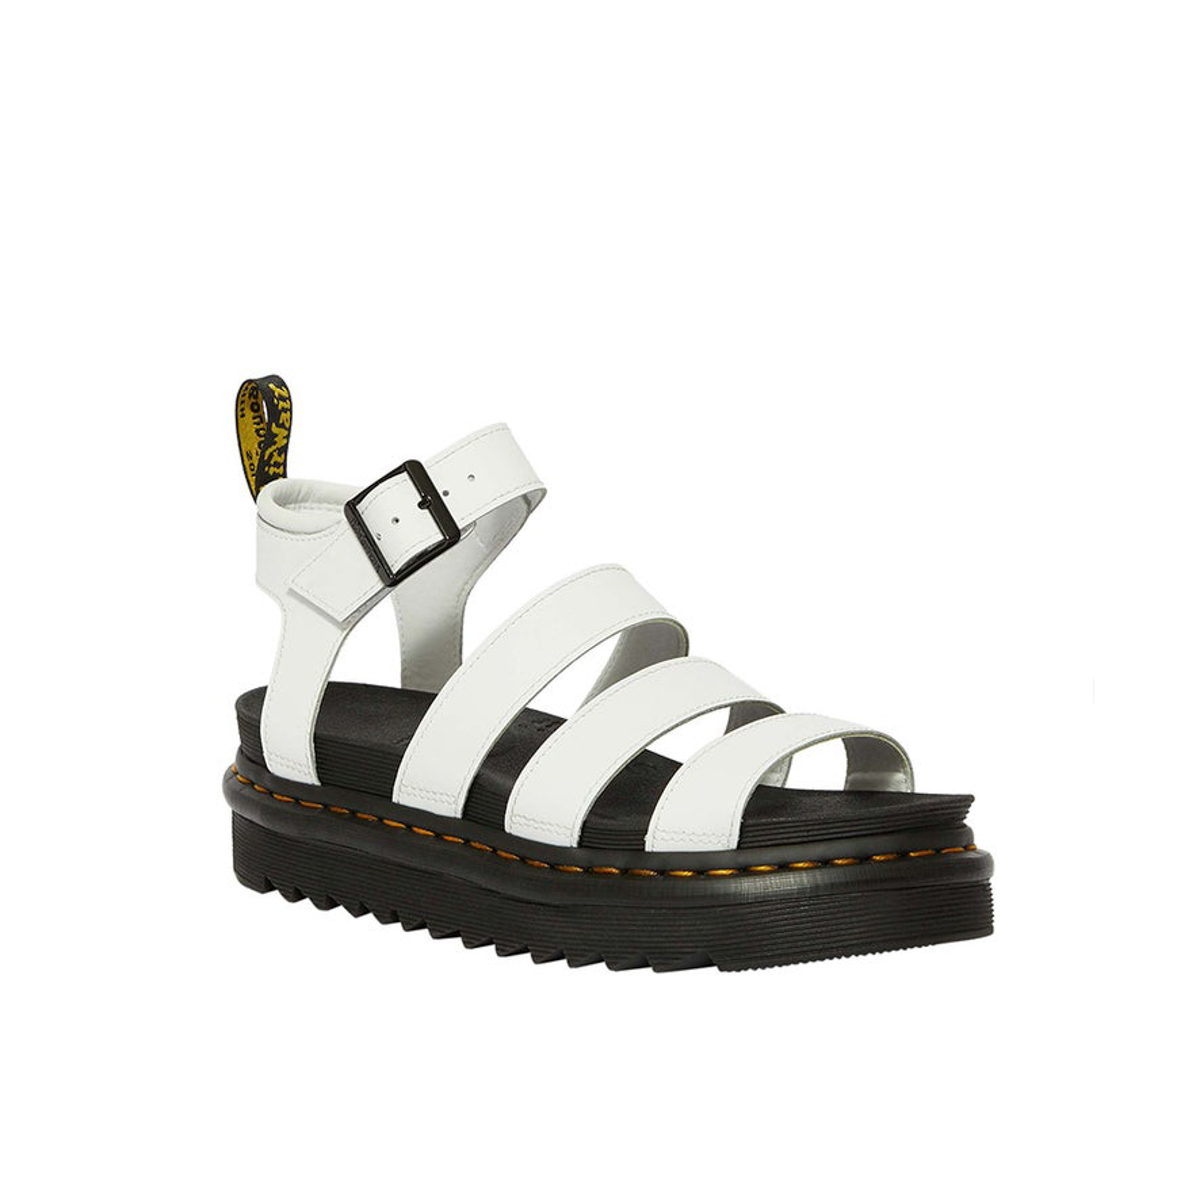 Dr Martens Blaire Hydro White Sandal - Issimo Shoes